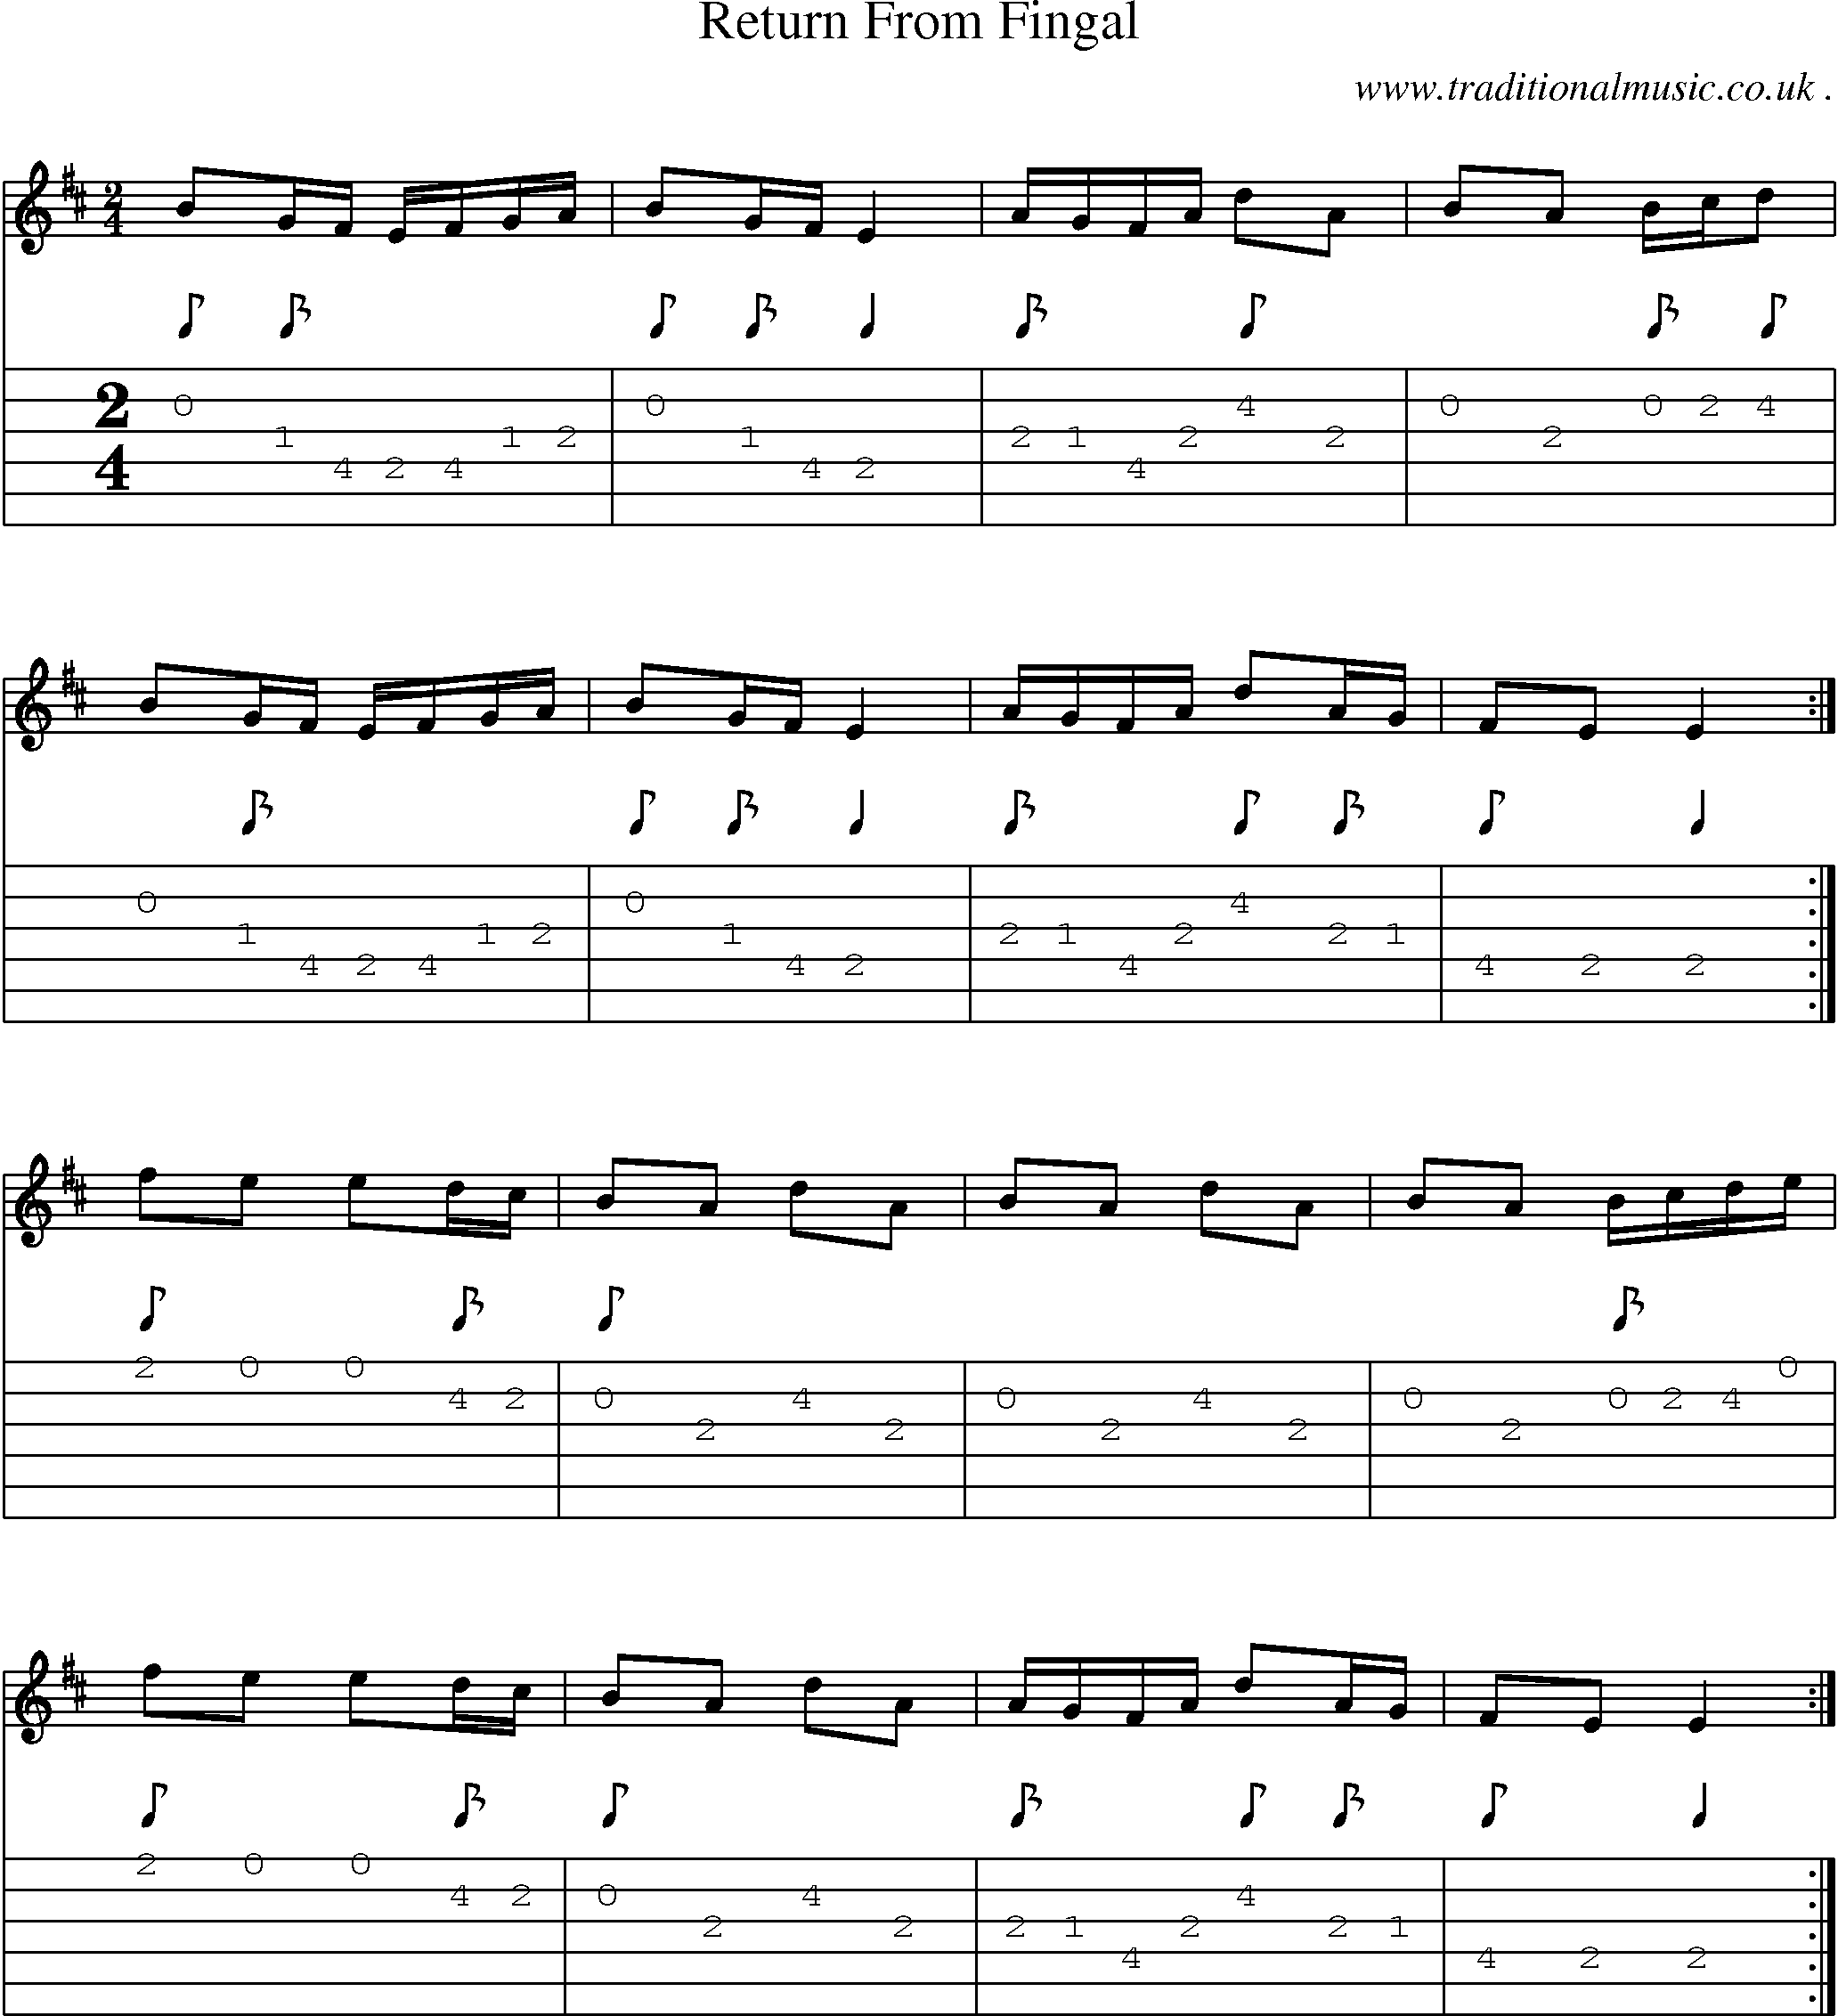 Sheet-Music and Guitar Tabs for Return From Fingal